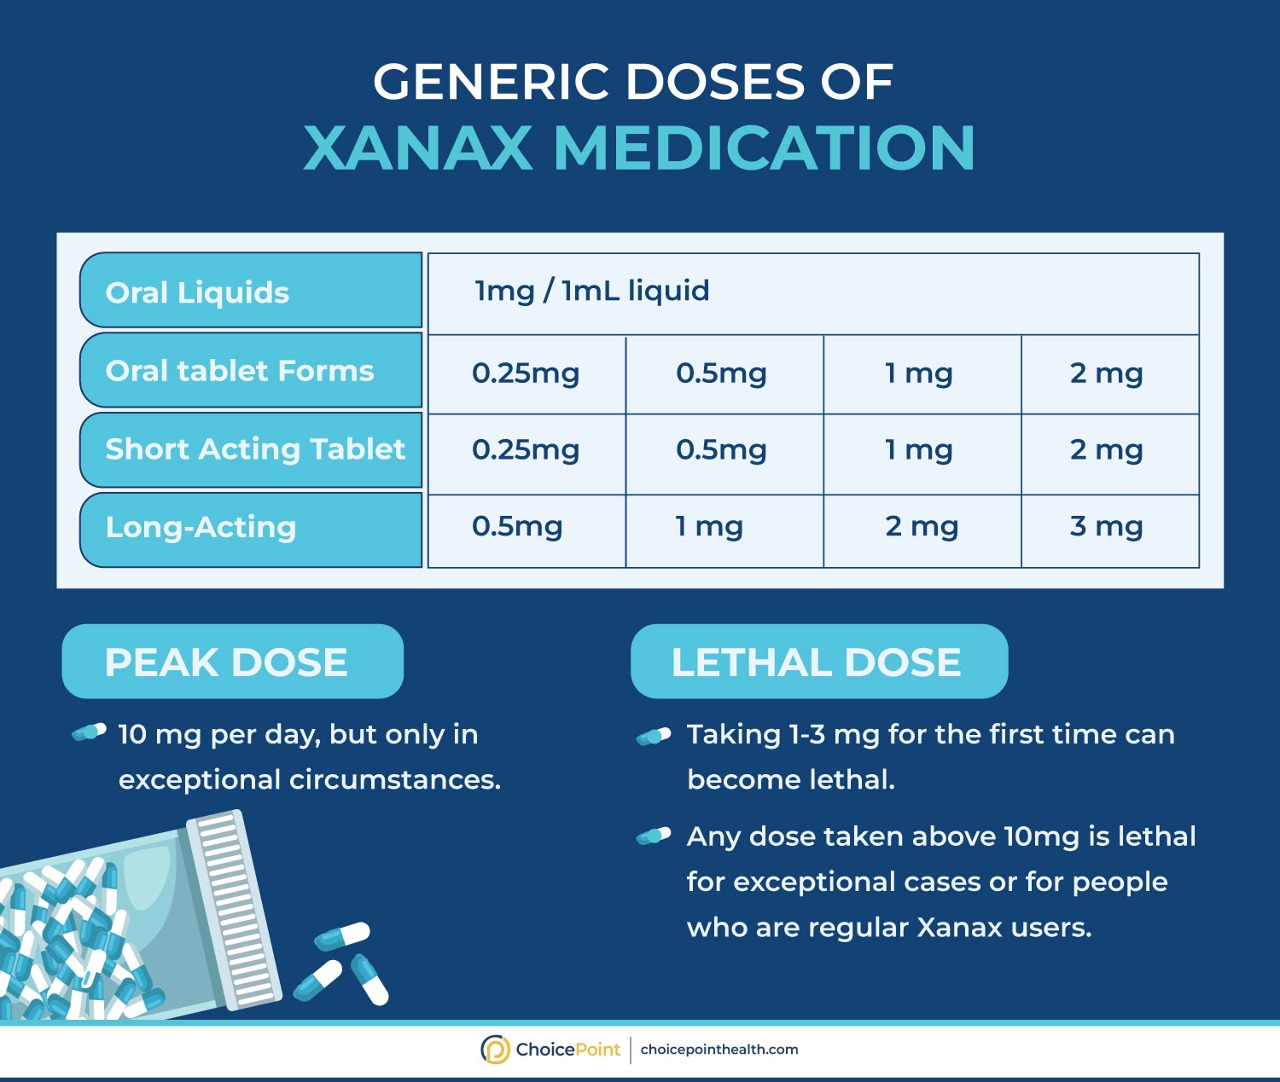 How Much Xanax is Too Much?